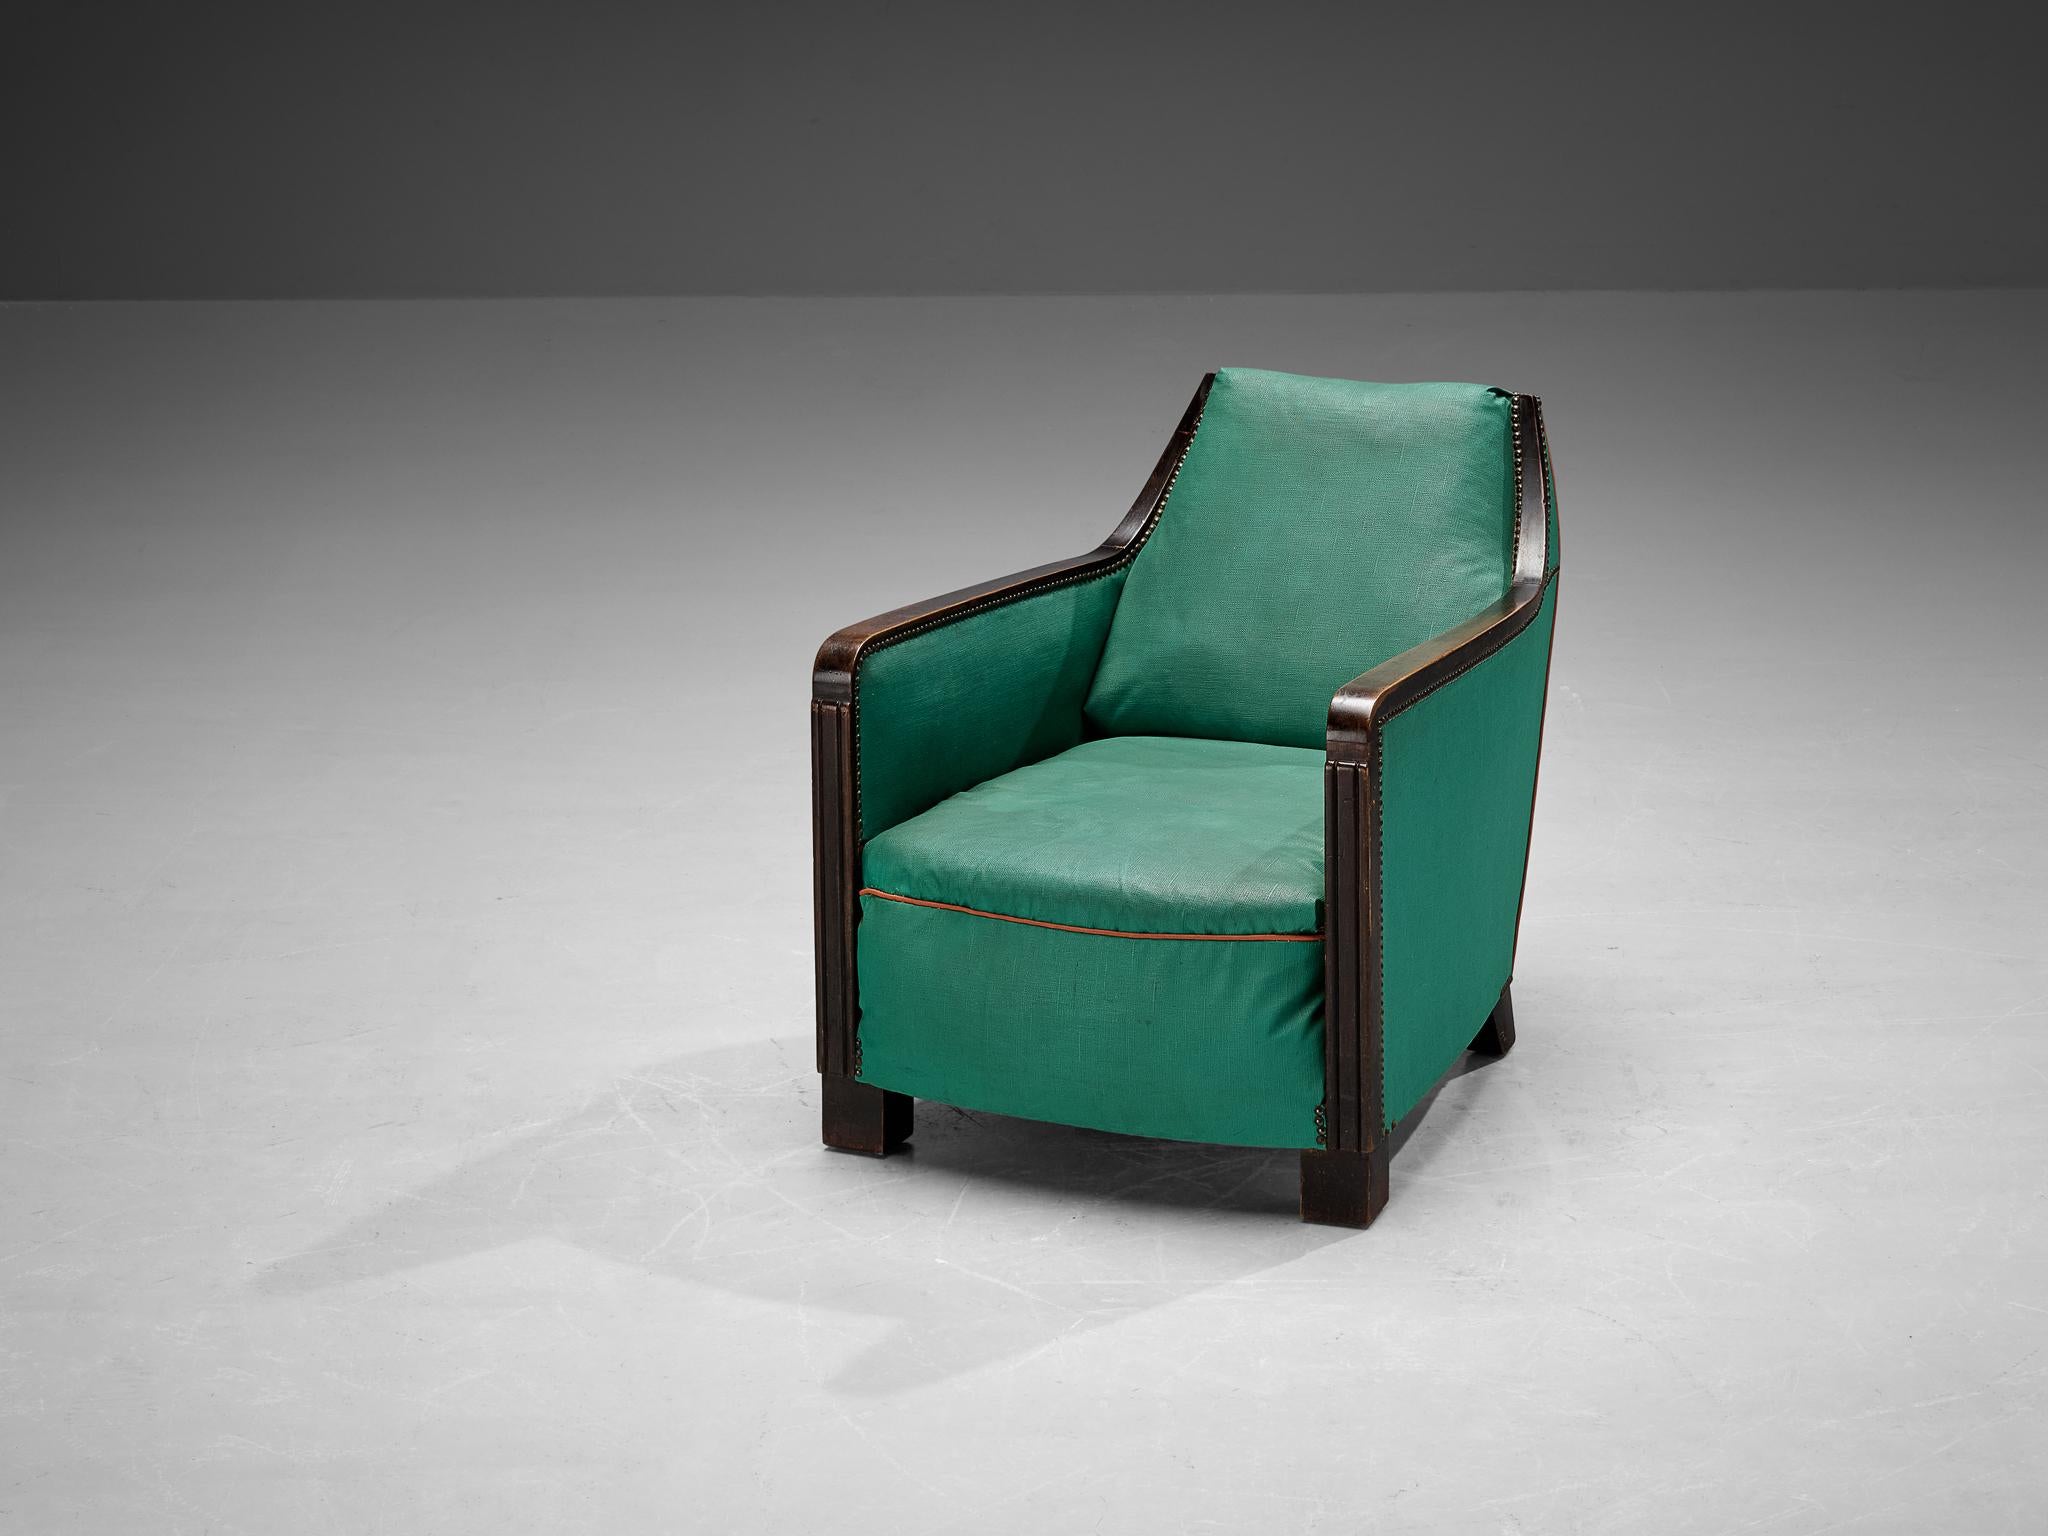 French Art Deco Armchair in Green Faux Leather For Sale 1